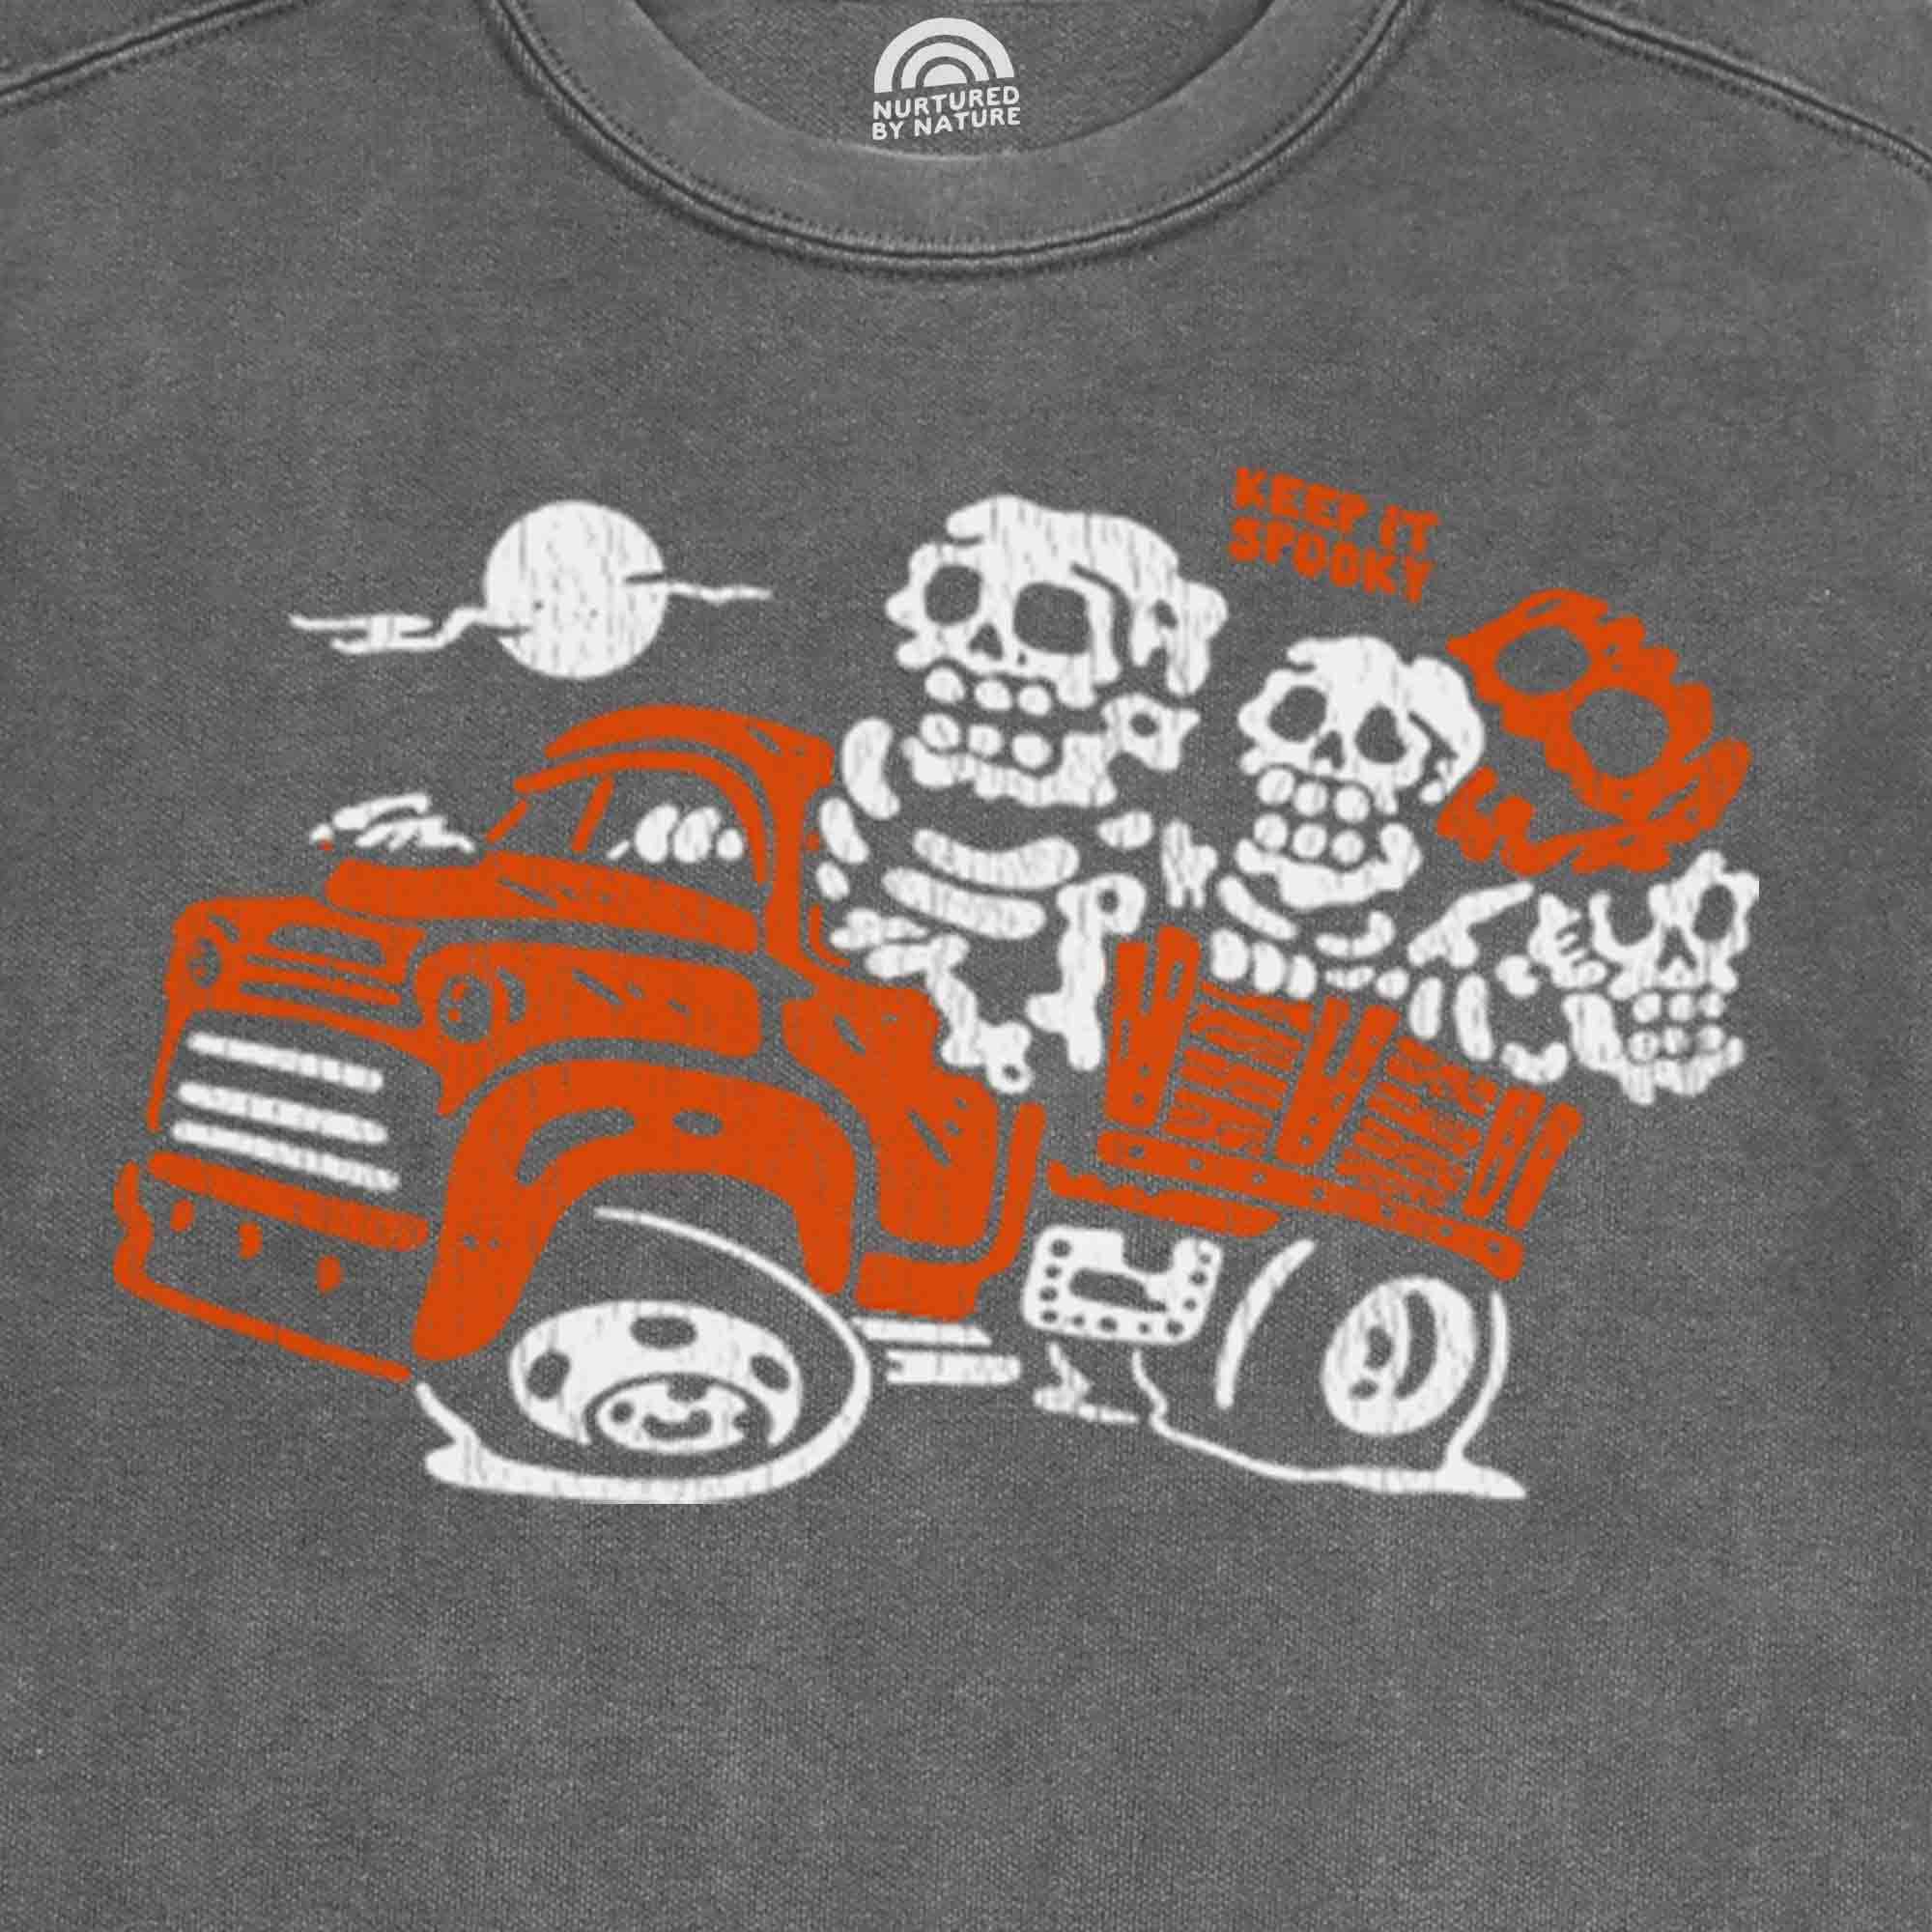 Spooky Haunted Hayride Graphic with Skeleton on a Truck on vintage wash grey crewneck sweatshirt made by Nurtured by Nature Studio